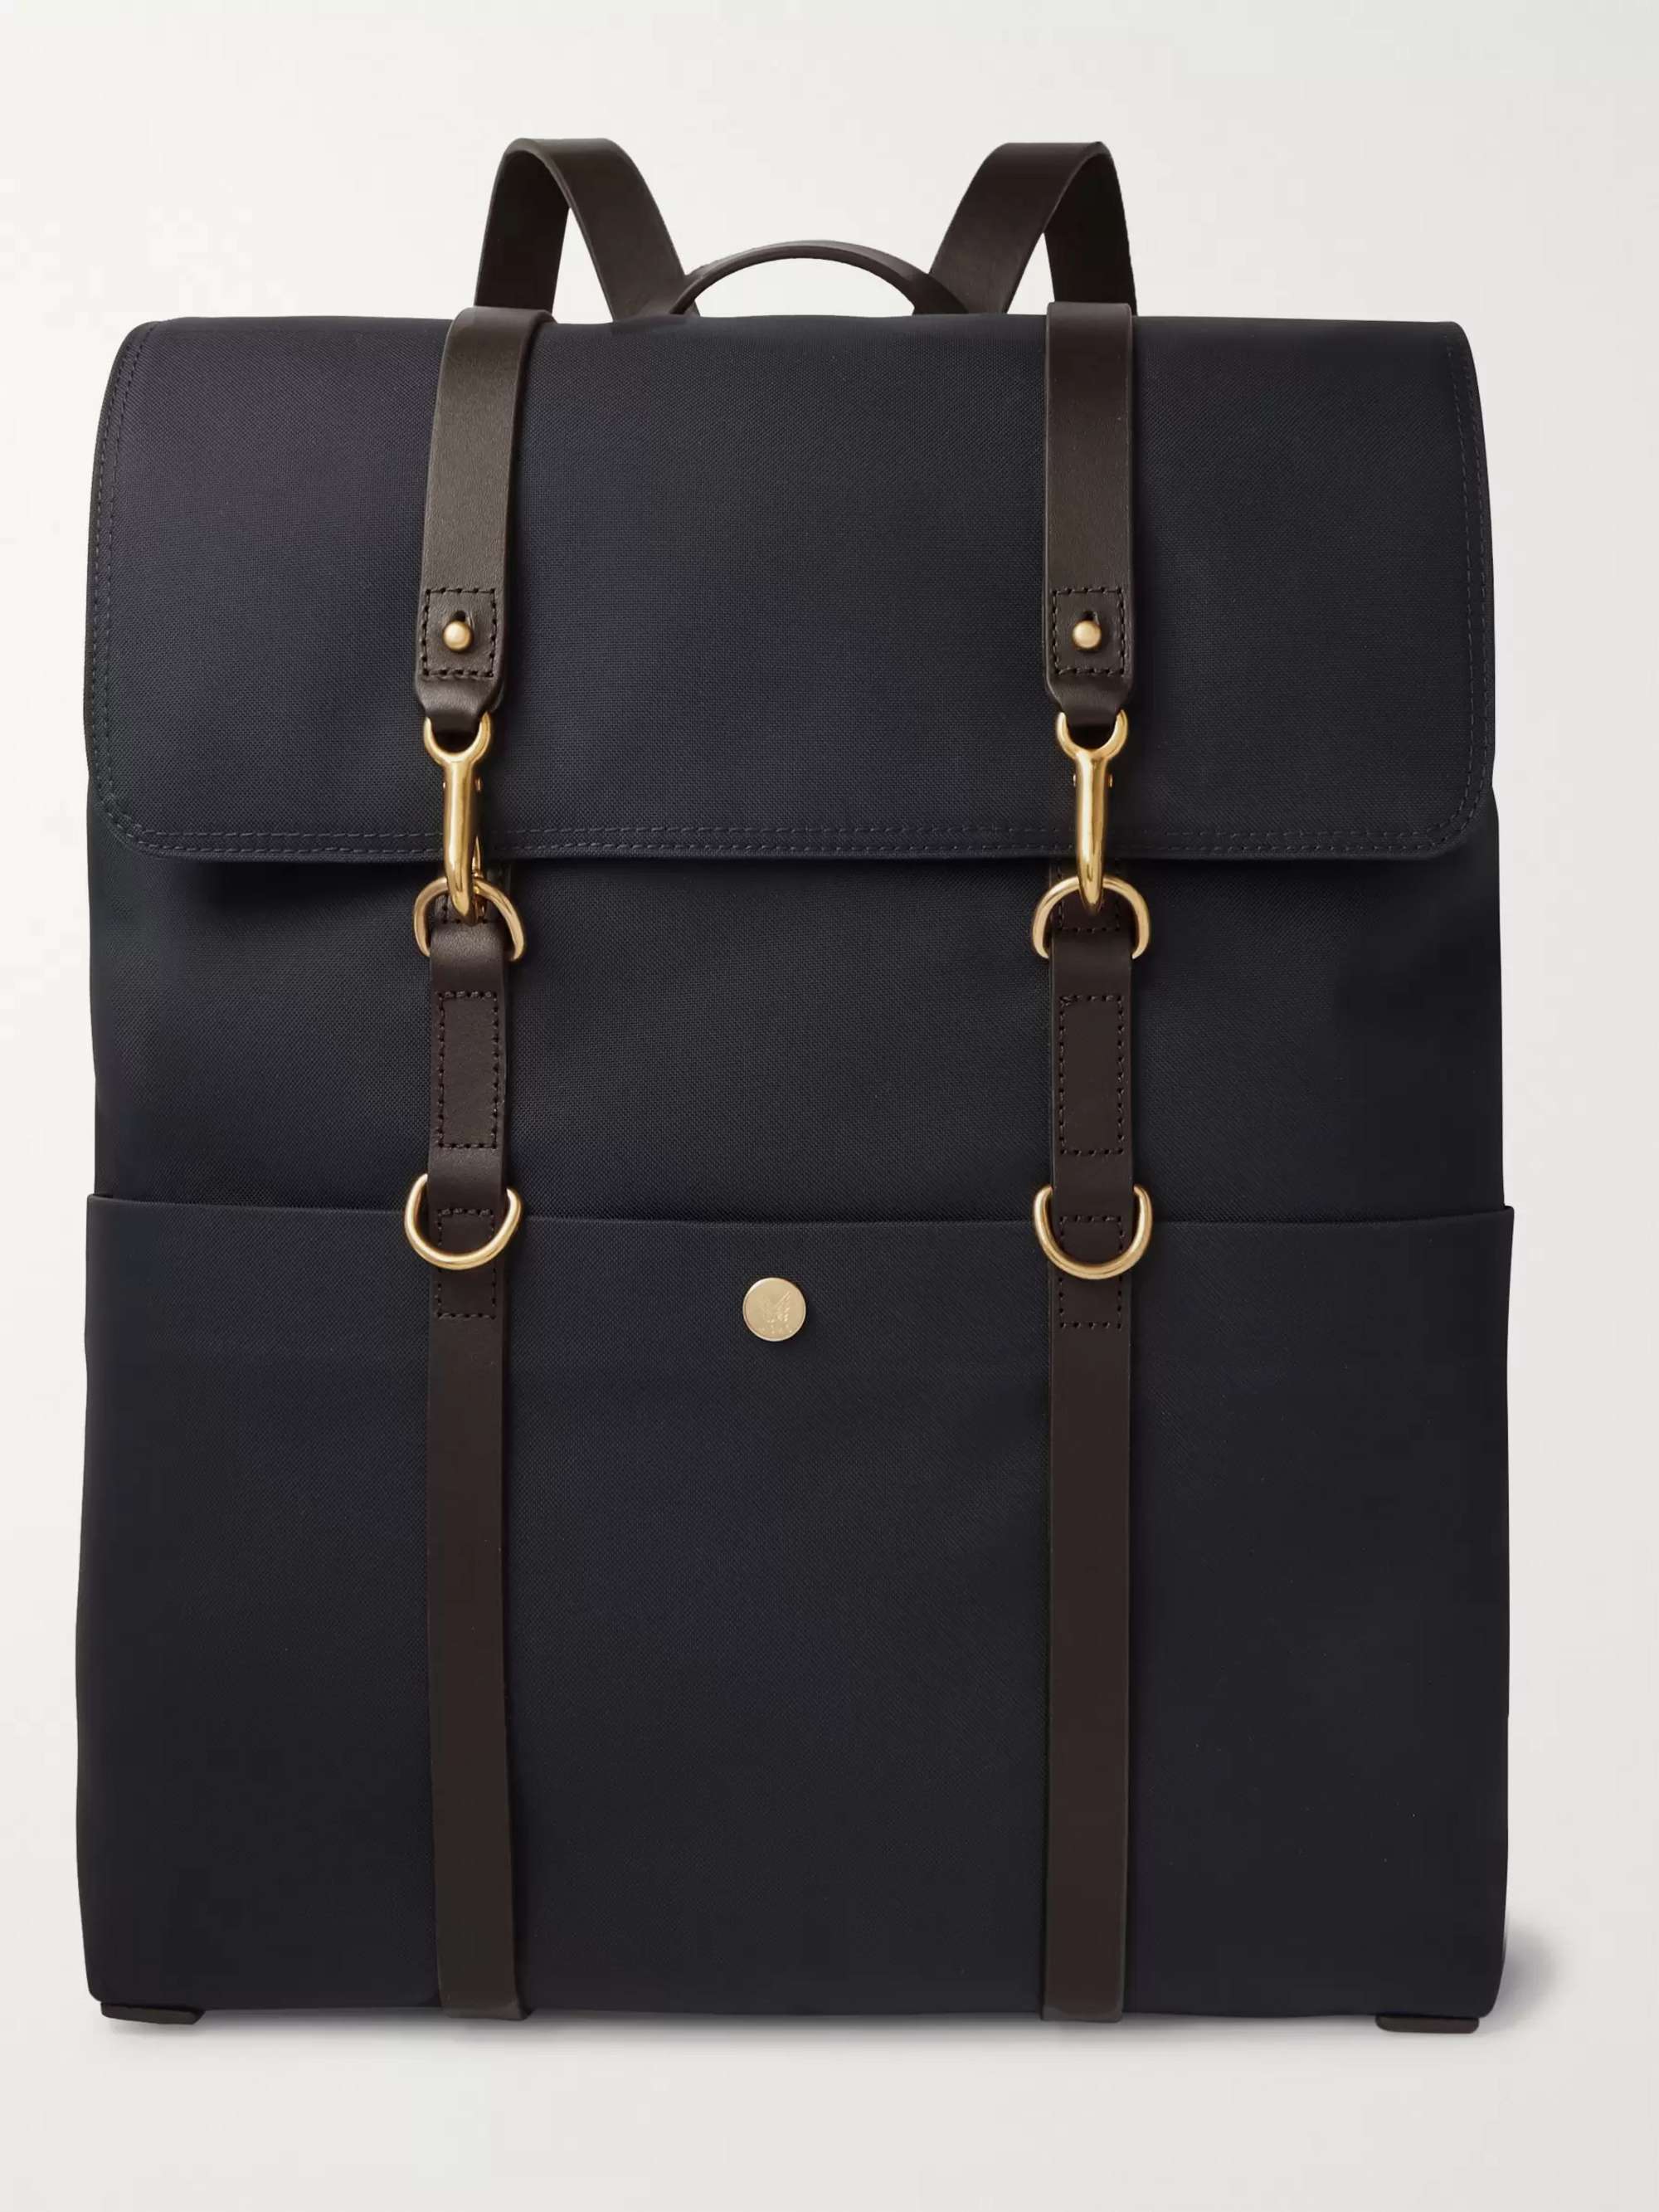 MISMO Leather-Trimmed Canvas Backpack